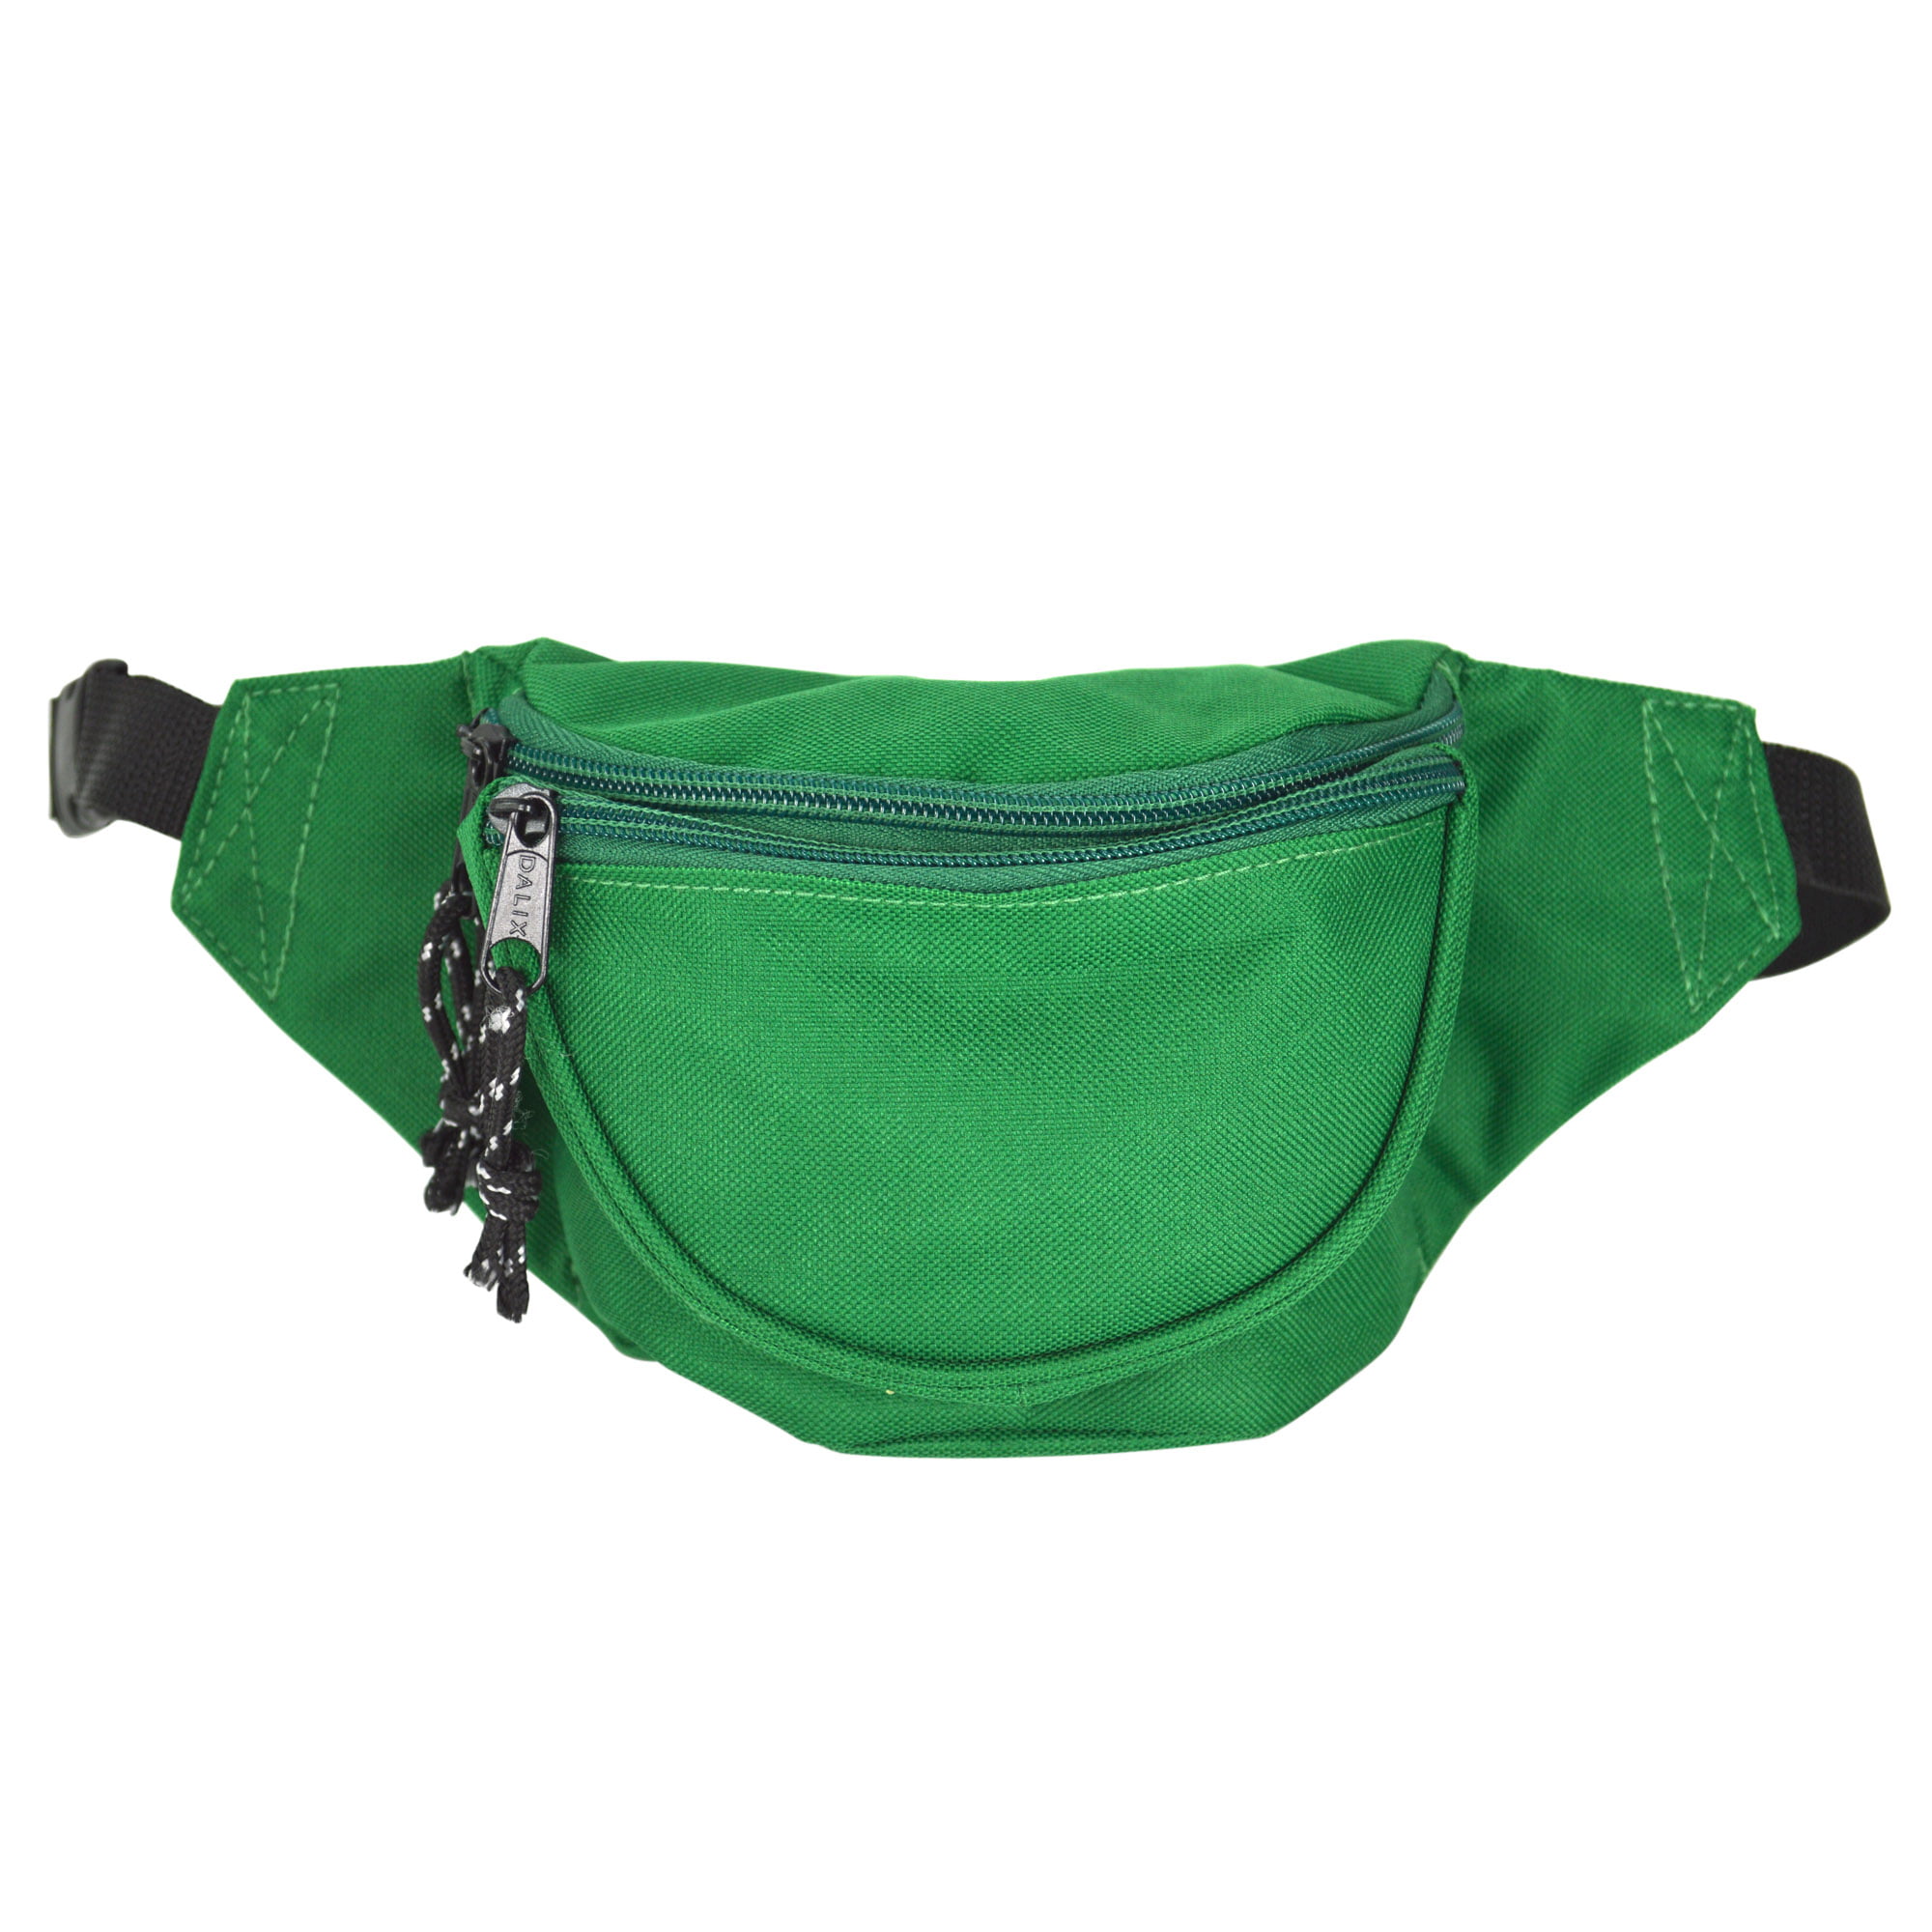 DALIX Small Fanny Pack Waist Pouch S XS Size 24 to 31 in Lime Green 